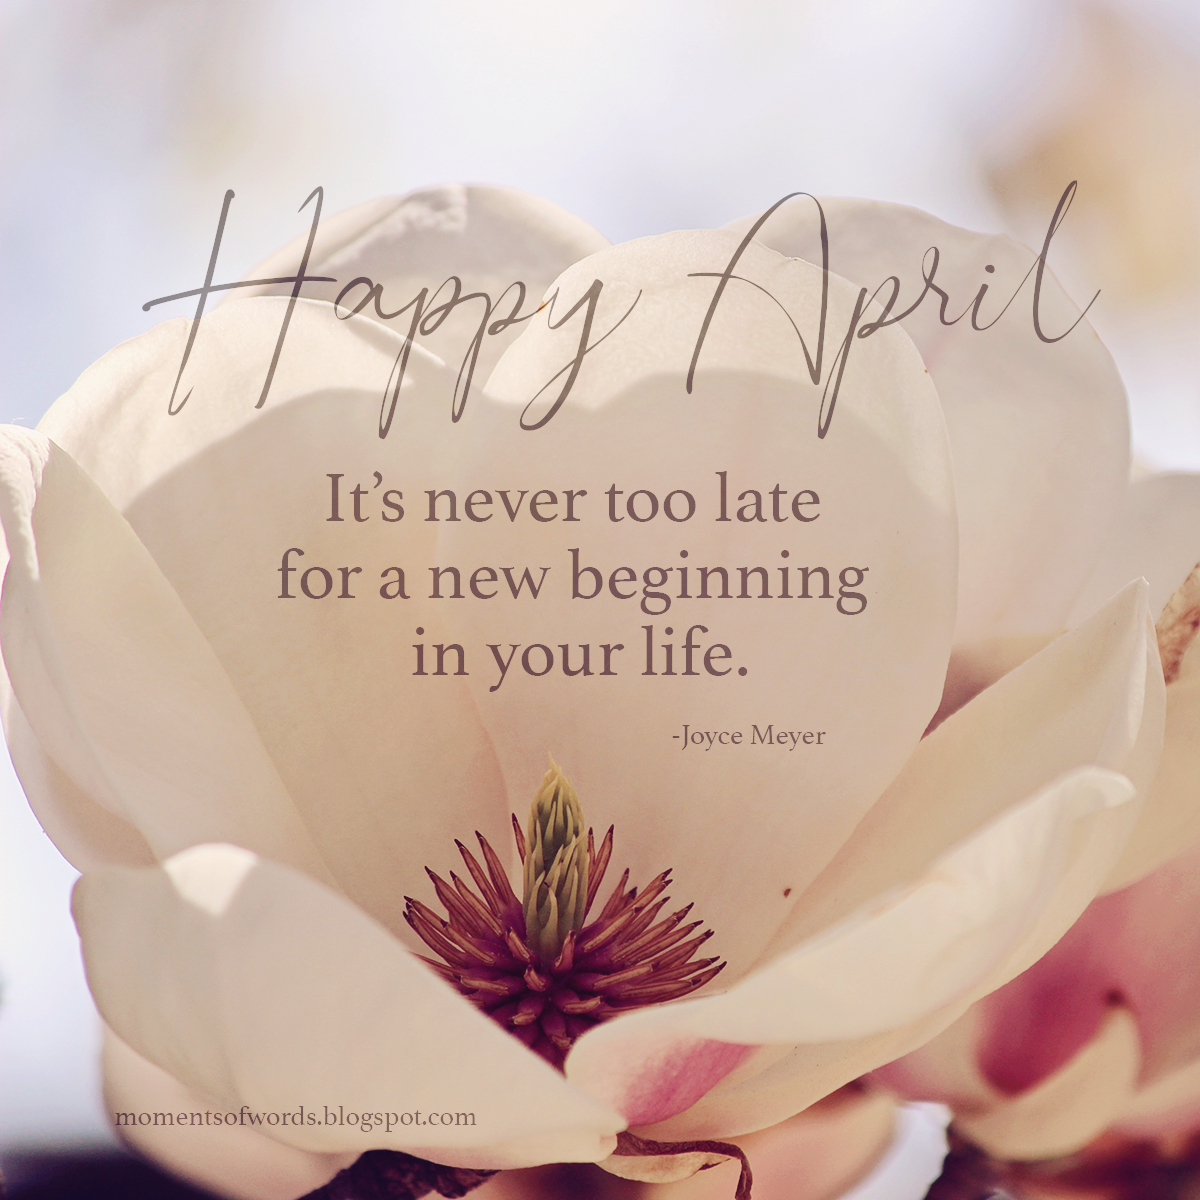 Have a blessed April! #happyapril | Moments of words